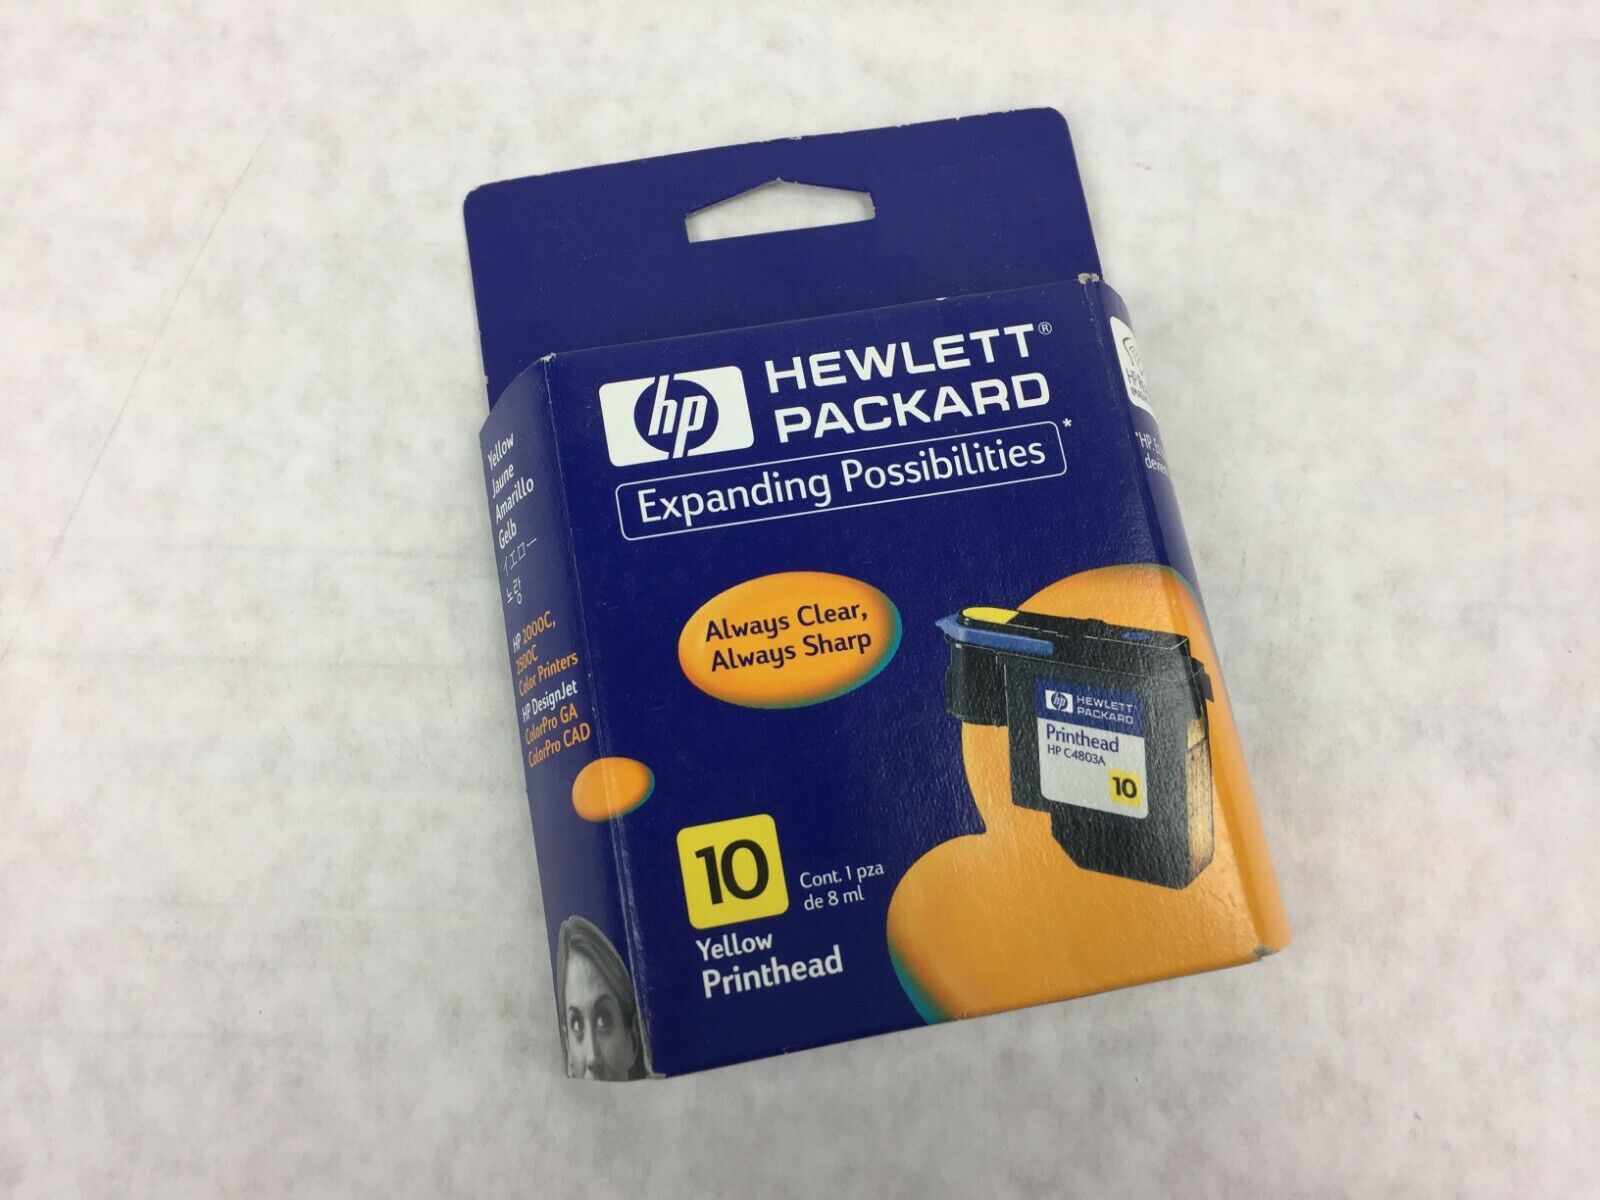 Genuine HP 10 Printhead Yellow C4803A  Warranty End Date May 2002 Factory Sealed